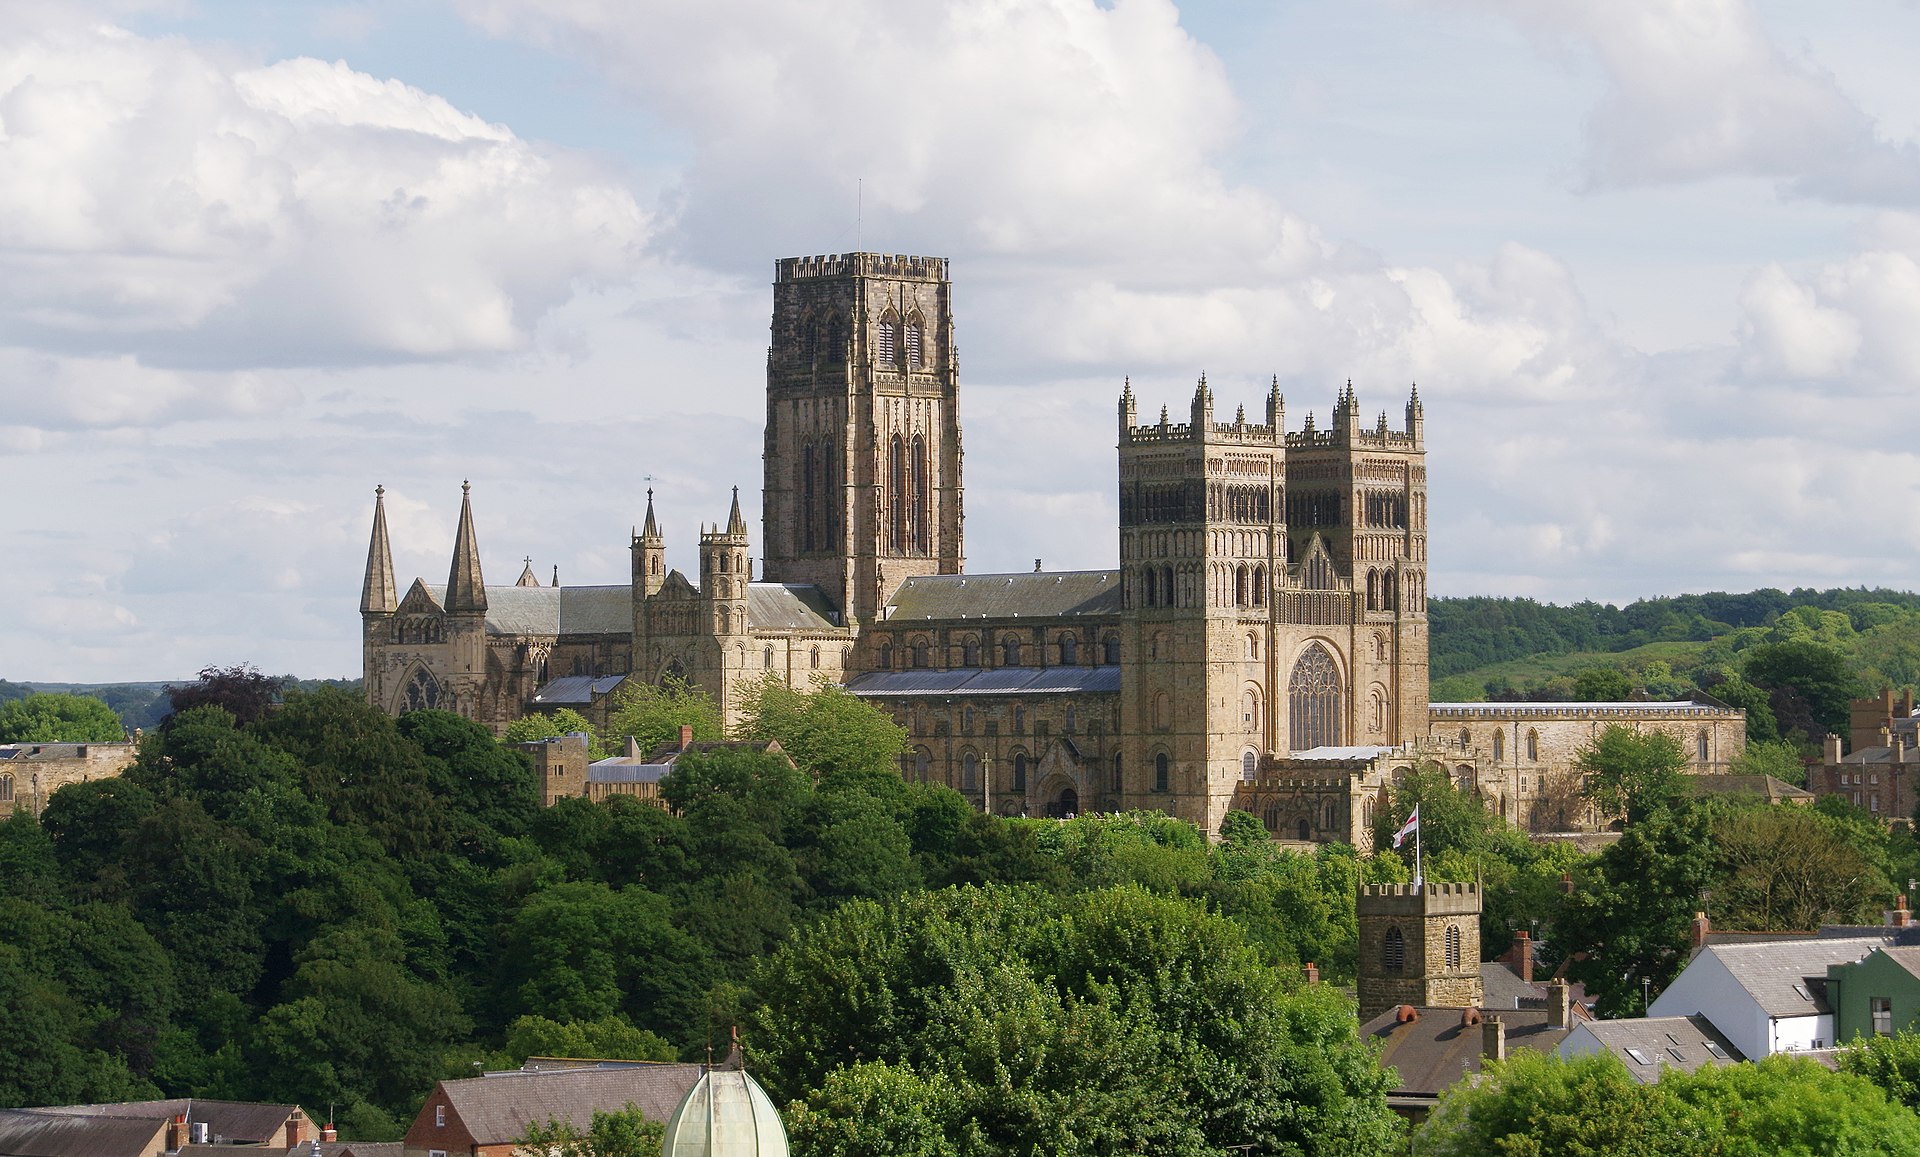 DURHAM CATHEDRAL Norman style (see § 625). Begun in 1093.